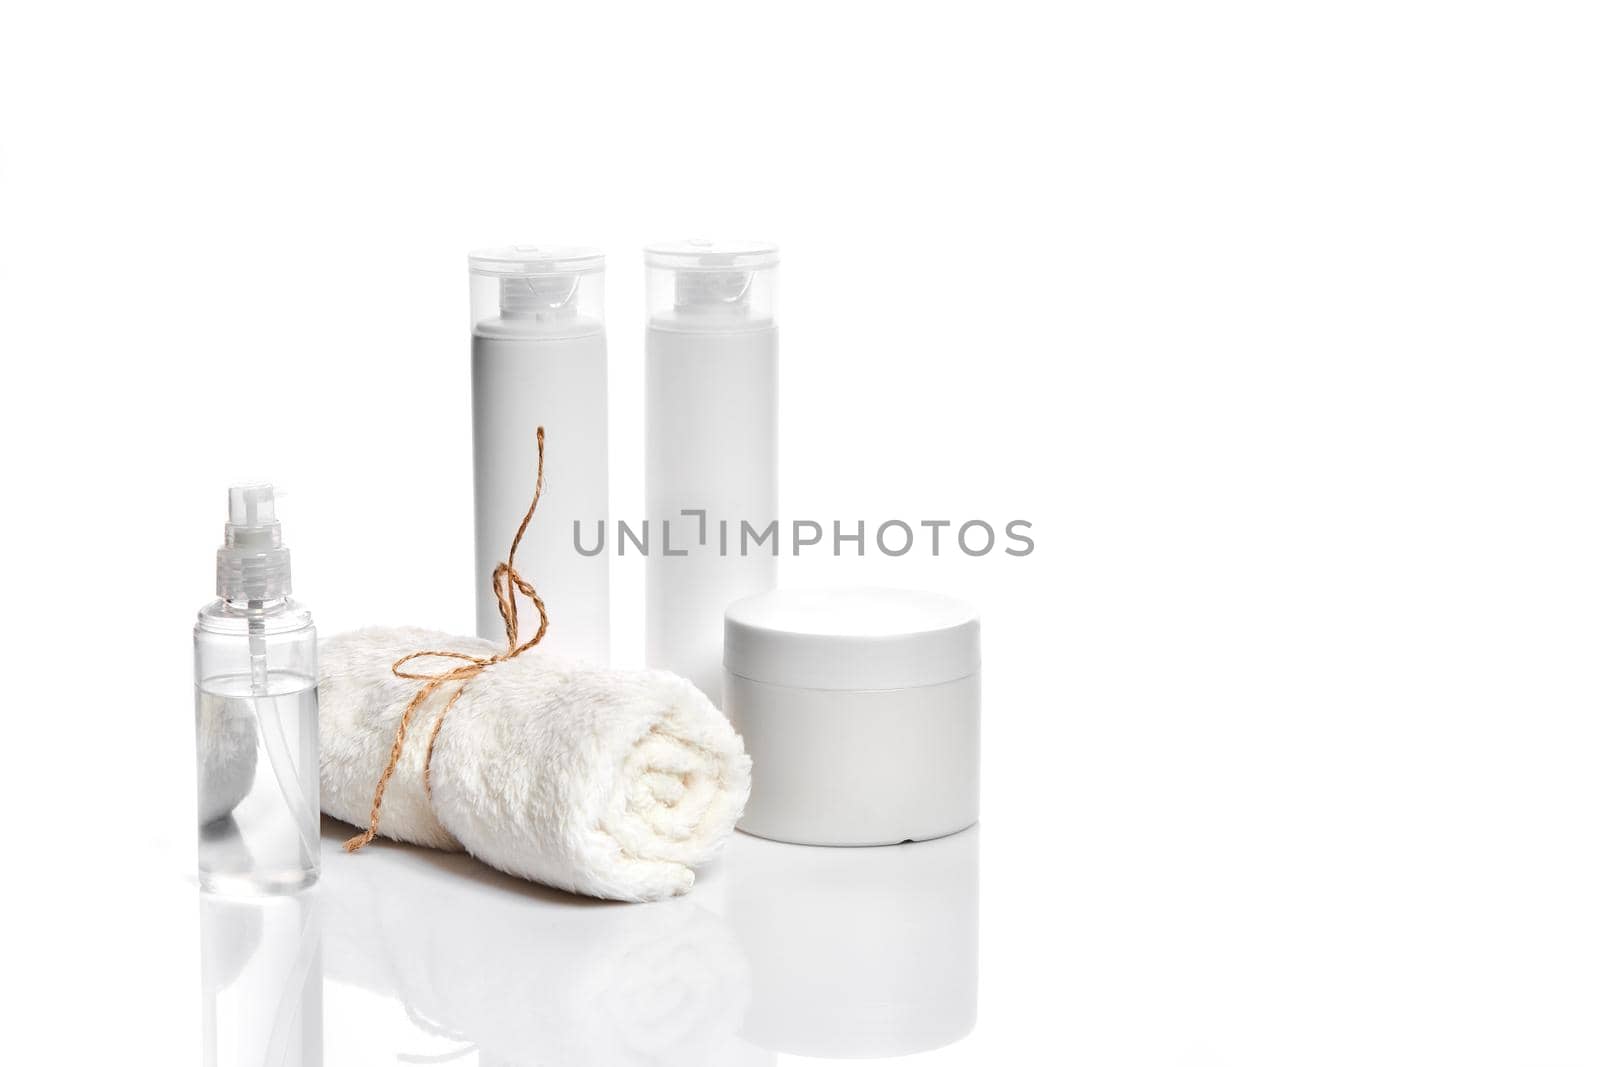 Set of cosmetic products in white containers on light background. Still life. Copy space. Place for your brand